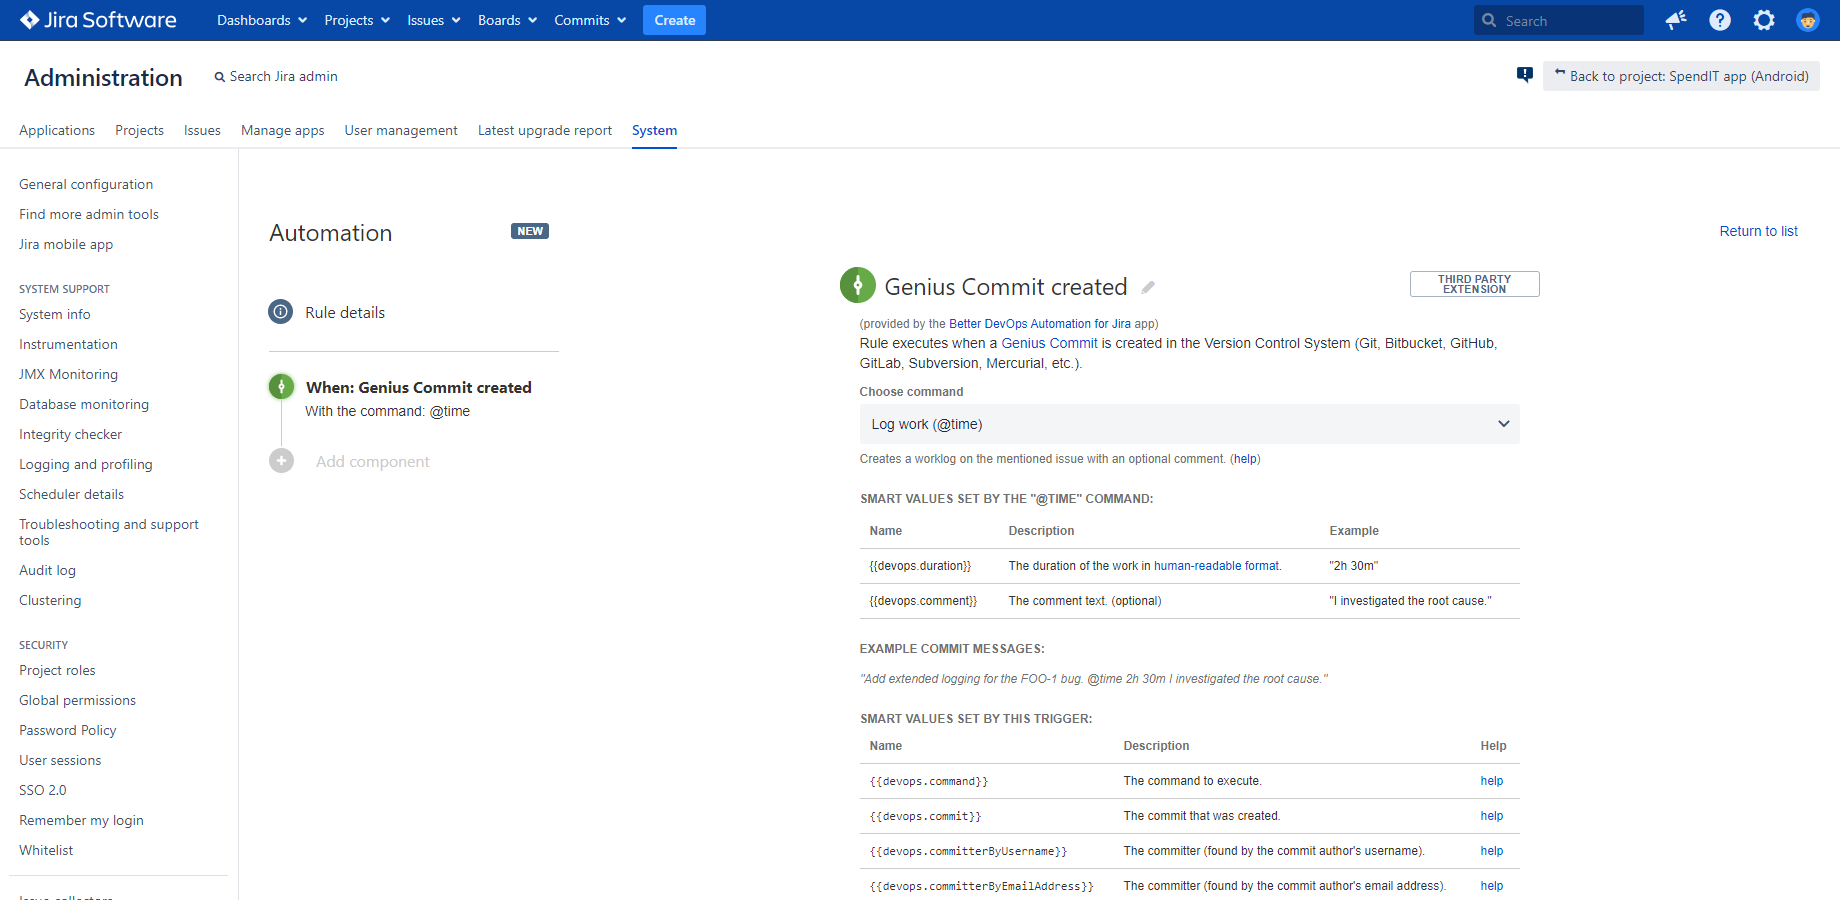 Configuring a Genius Commit Created trigger for a DevOps Automation for Jira rule